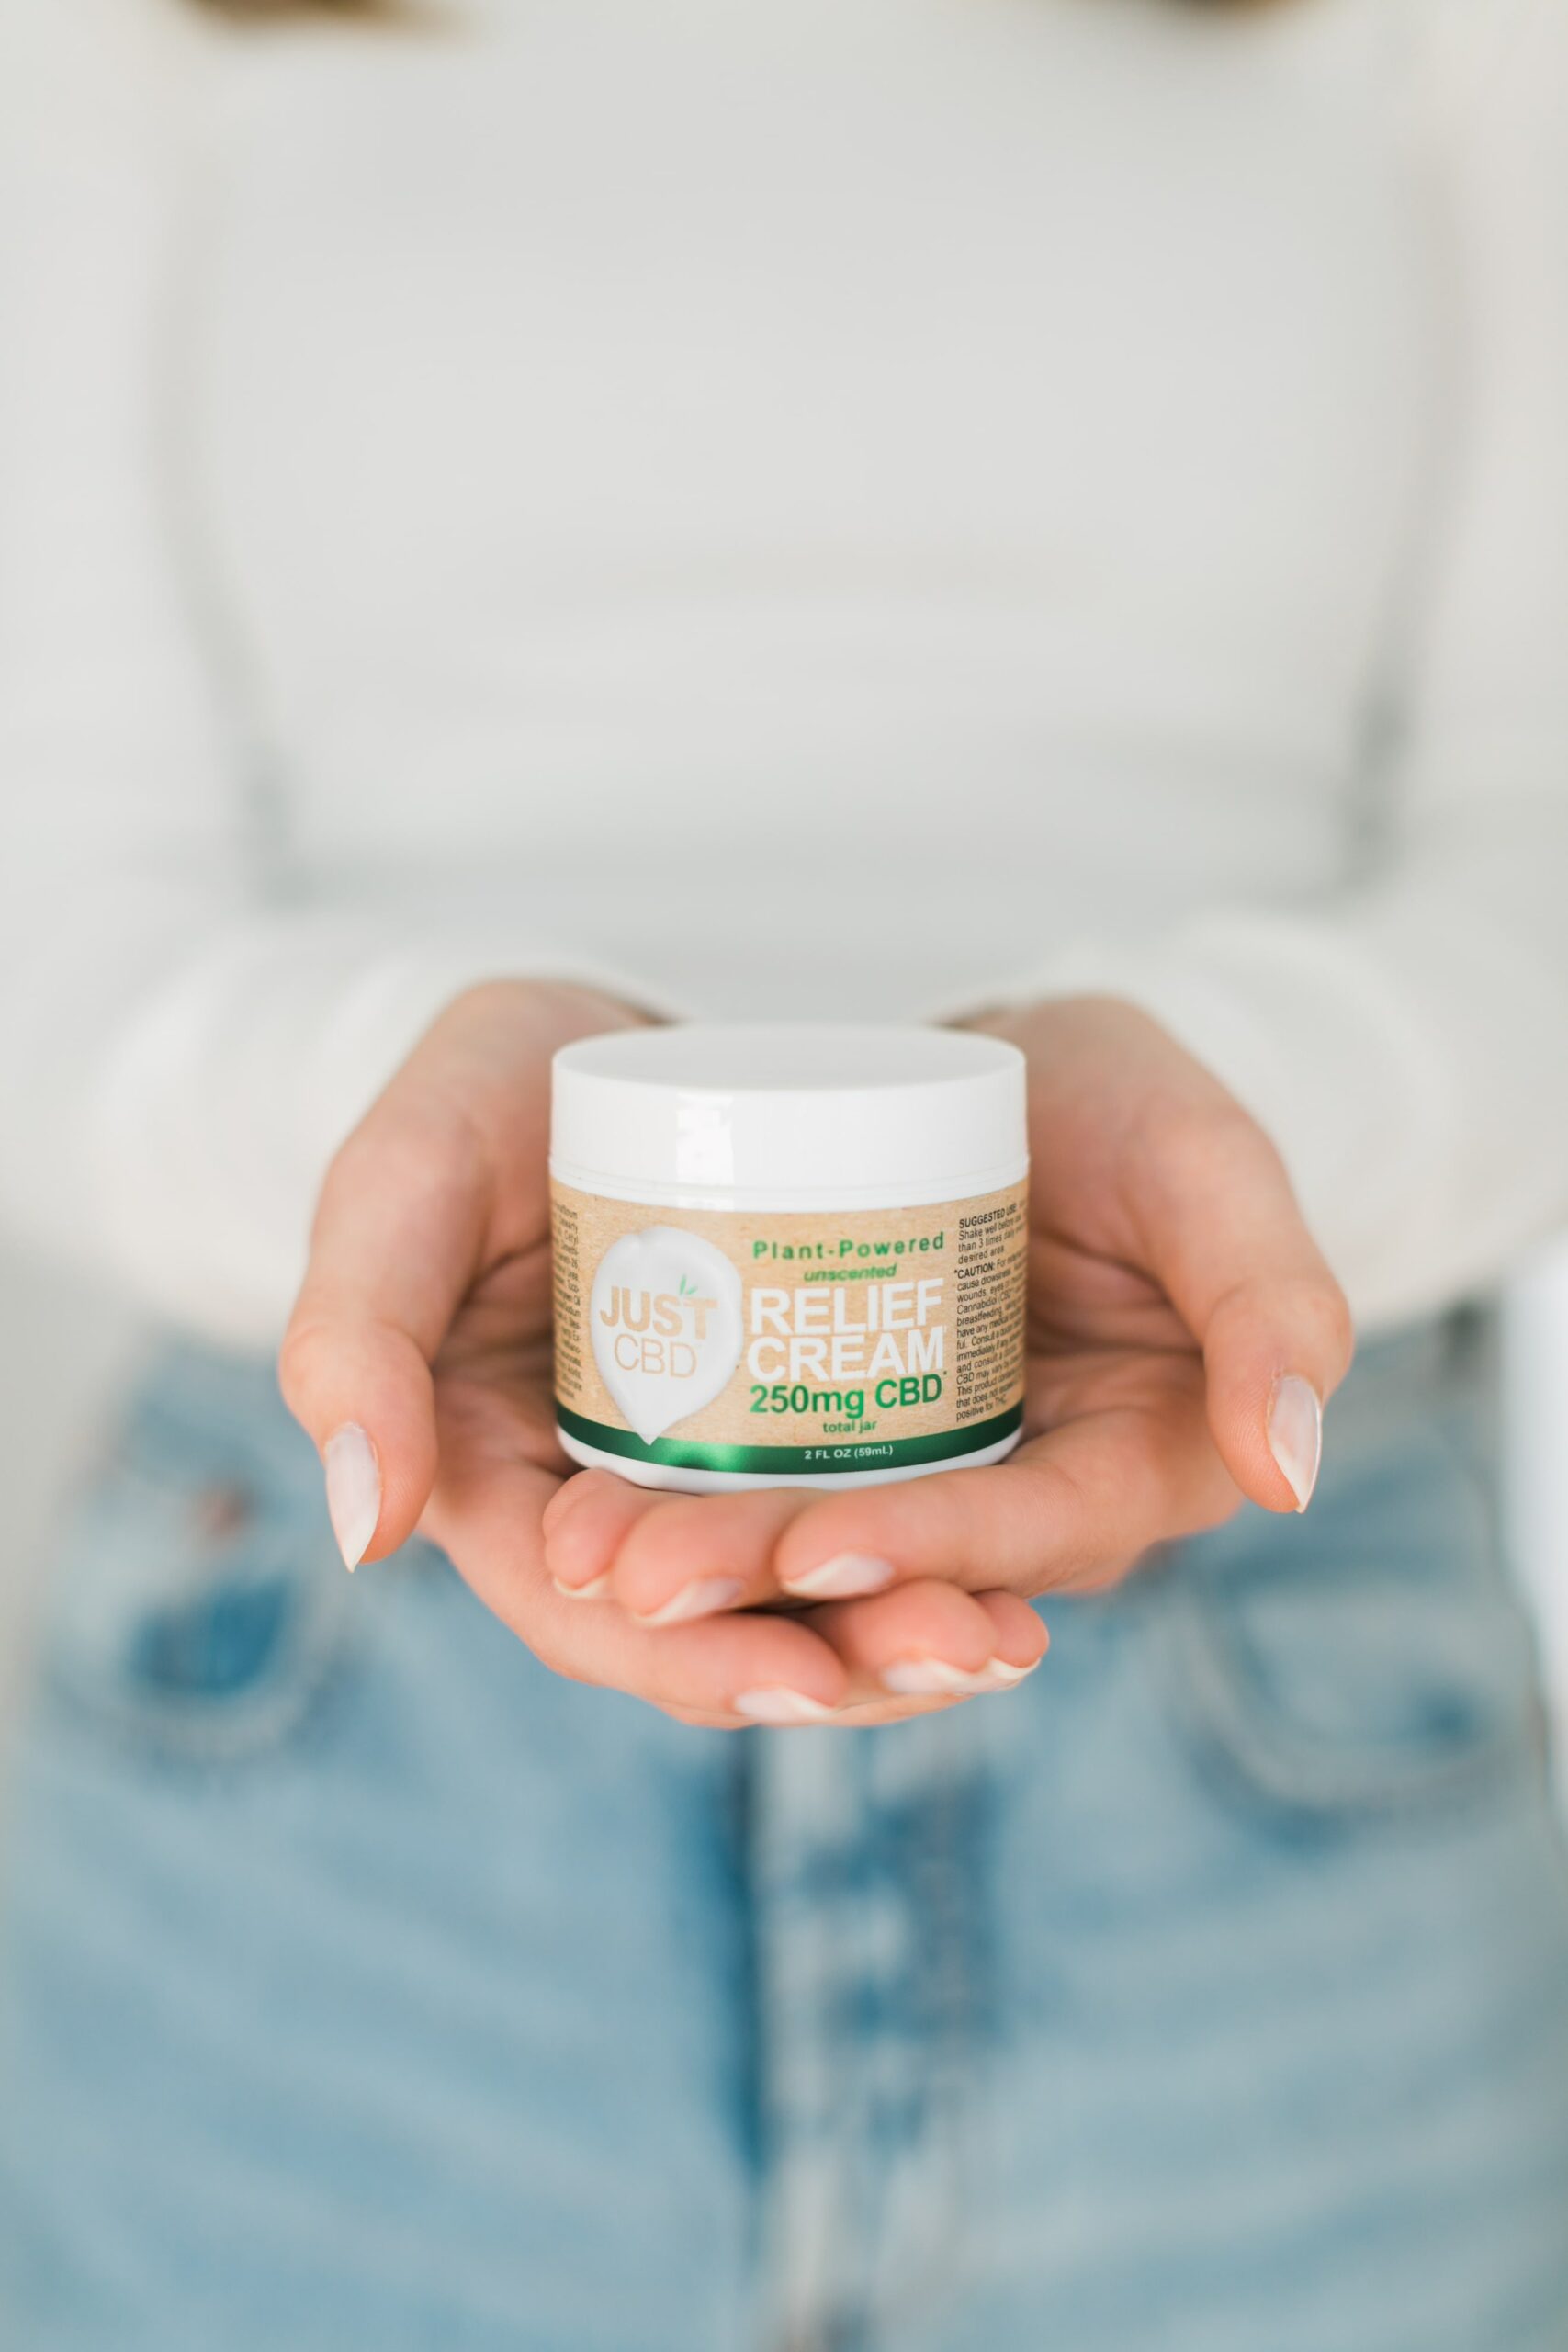 HOW DOES CBD TOPICAL WORK?